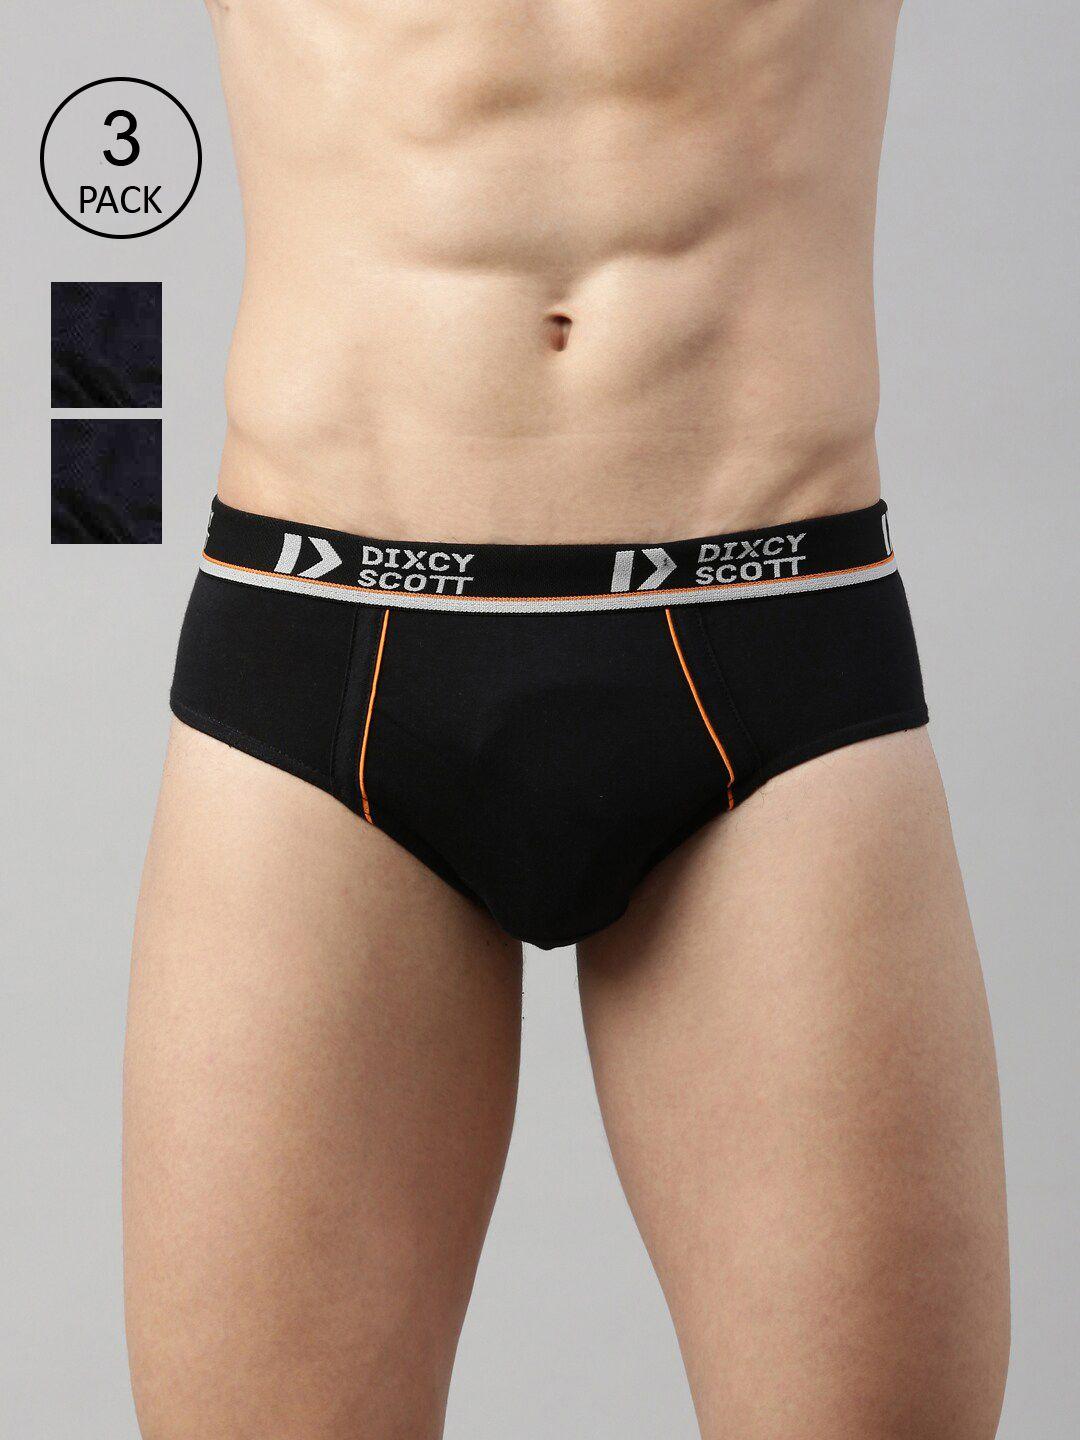 dixcy scott men pack of 3 black solid cotton mid-rise basic briefs